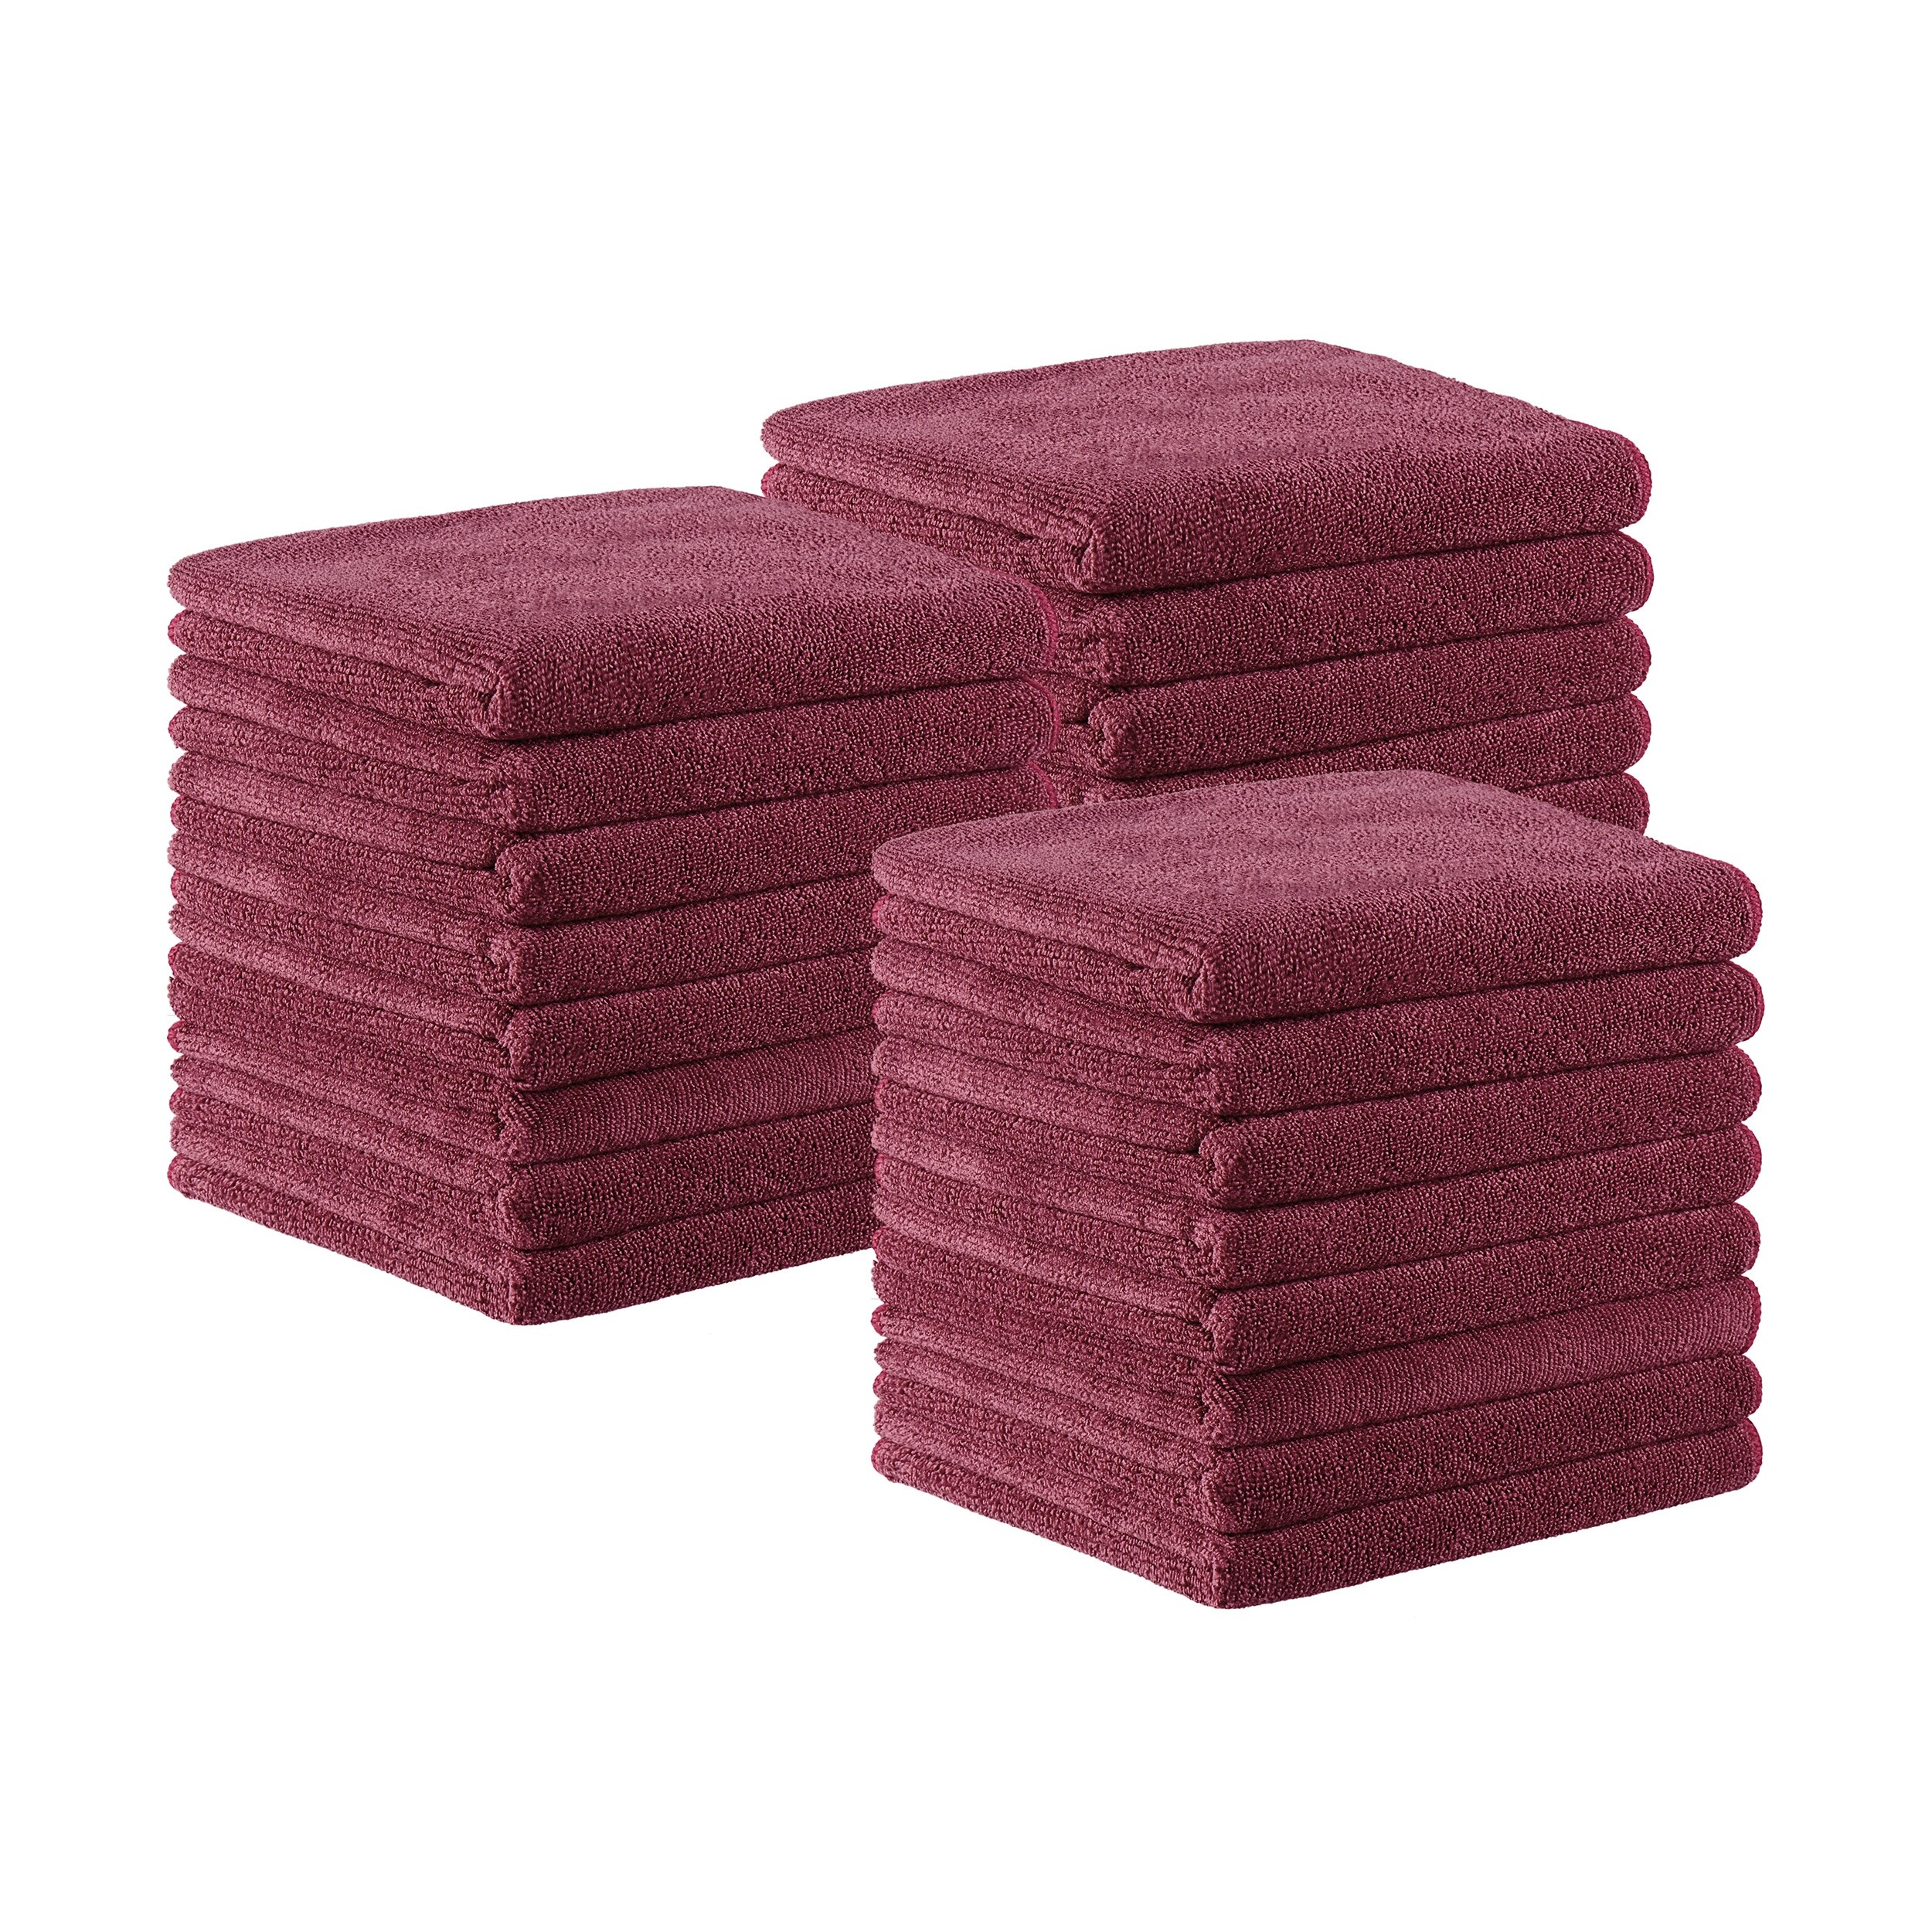 Arkwright Microfiber Gym Towels - Soft Quick Dry Hand Towel - 16 x 27 in. - (12 Pack) Pink